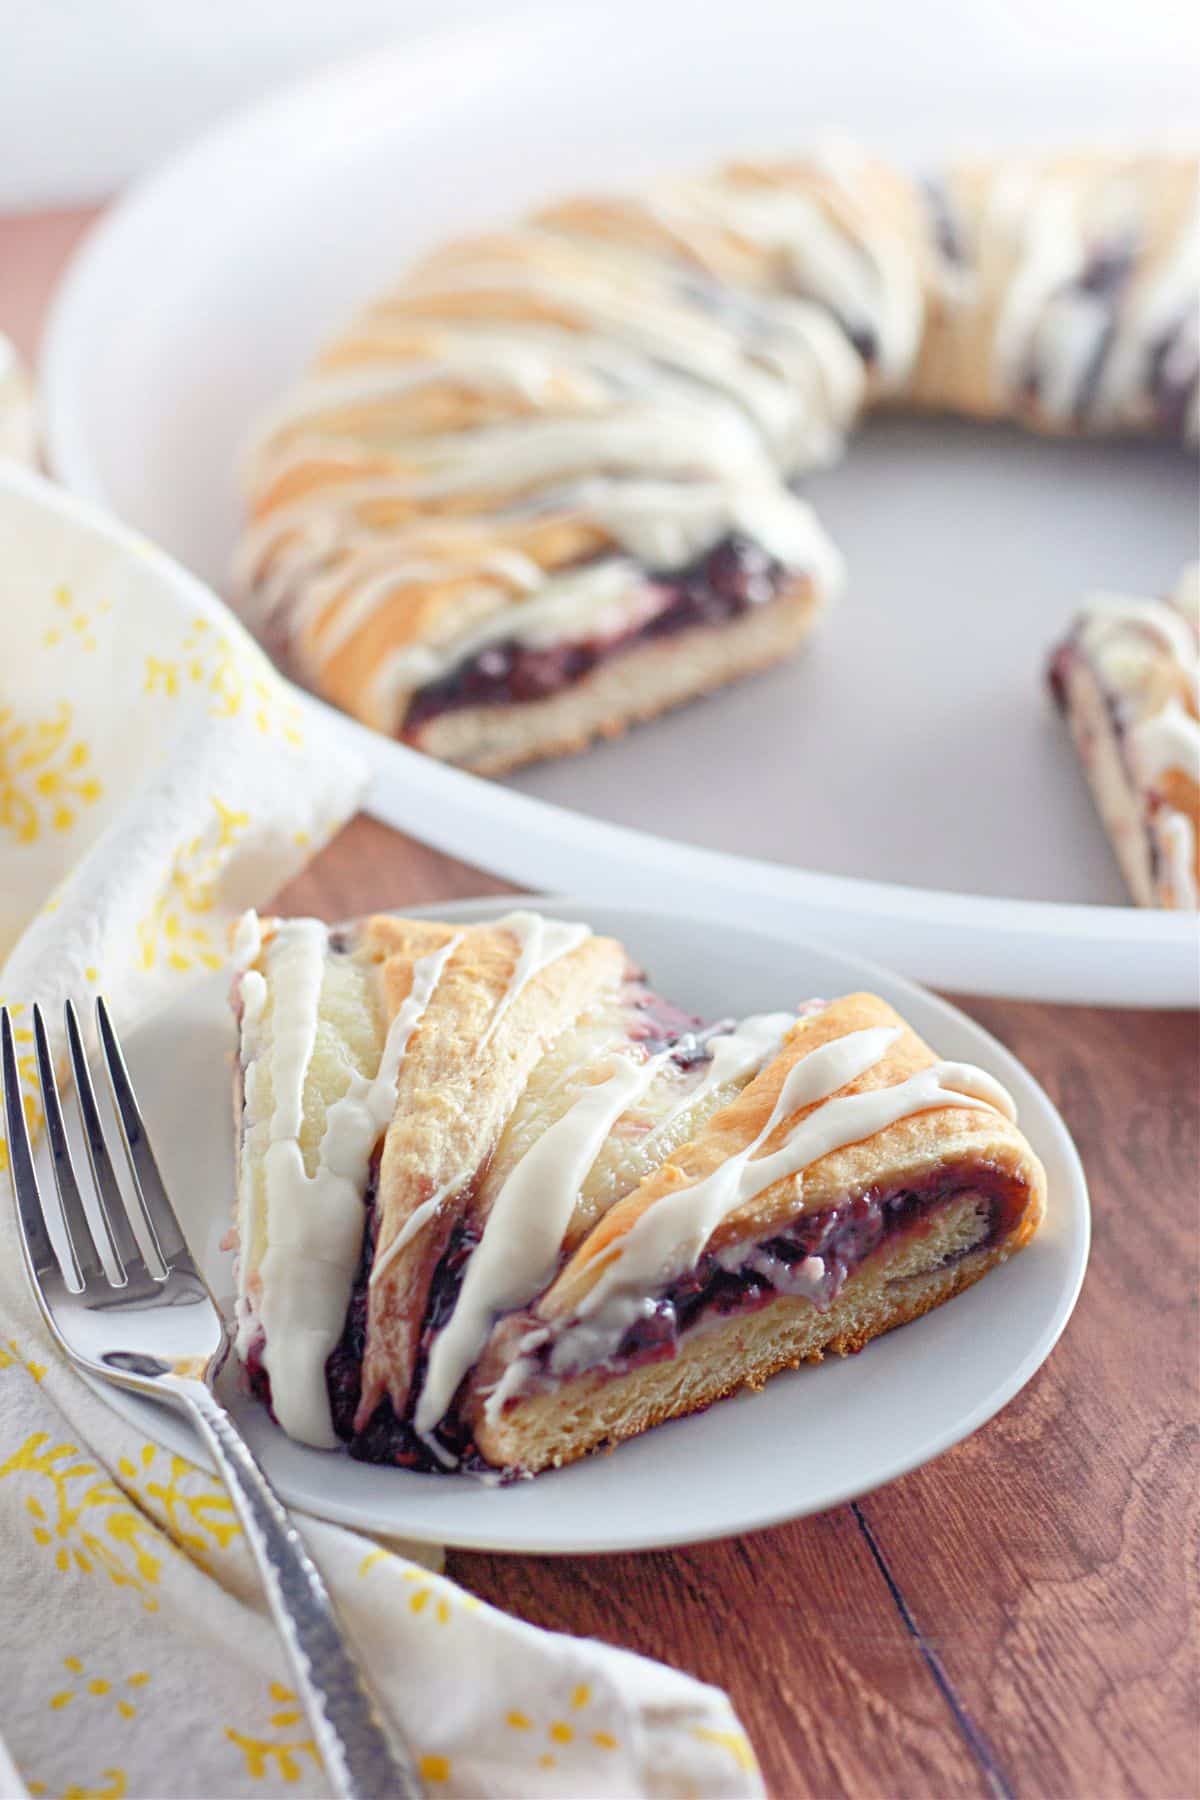 A slice of pastry filled with raspberry and cream cheese on a white plate next to a fork.